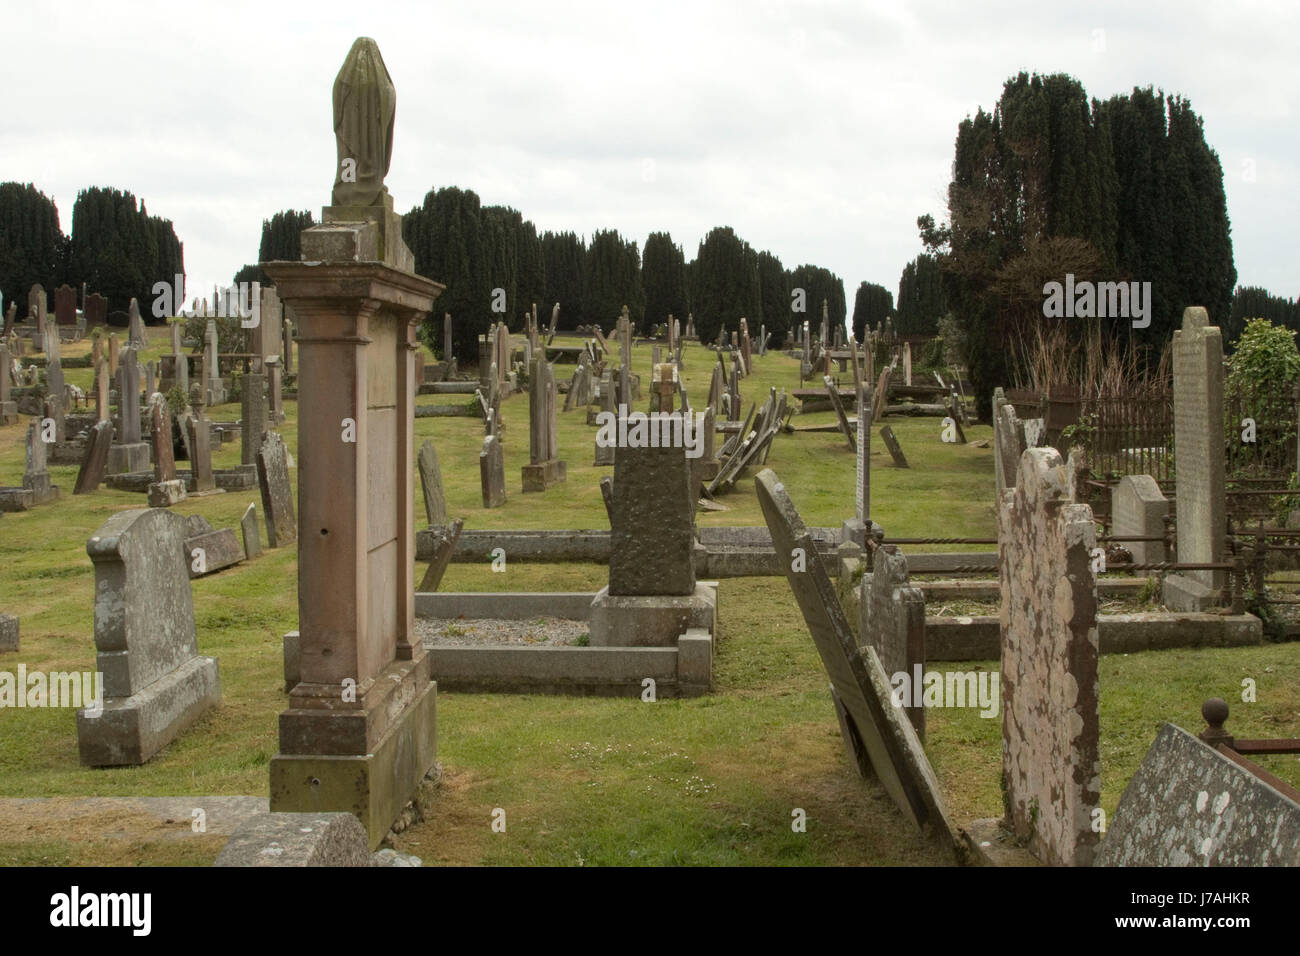 Headstones in an old cemetery in Newtownards Co Down Northern Ireland Stock Photo